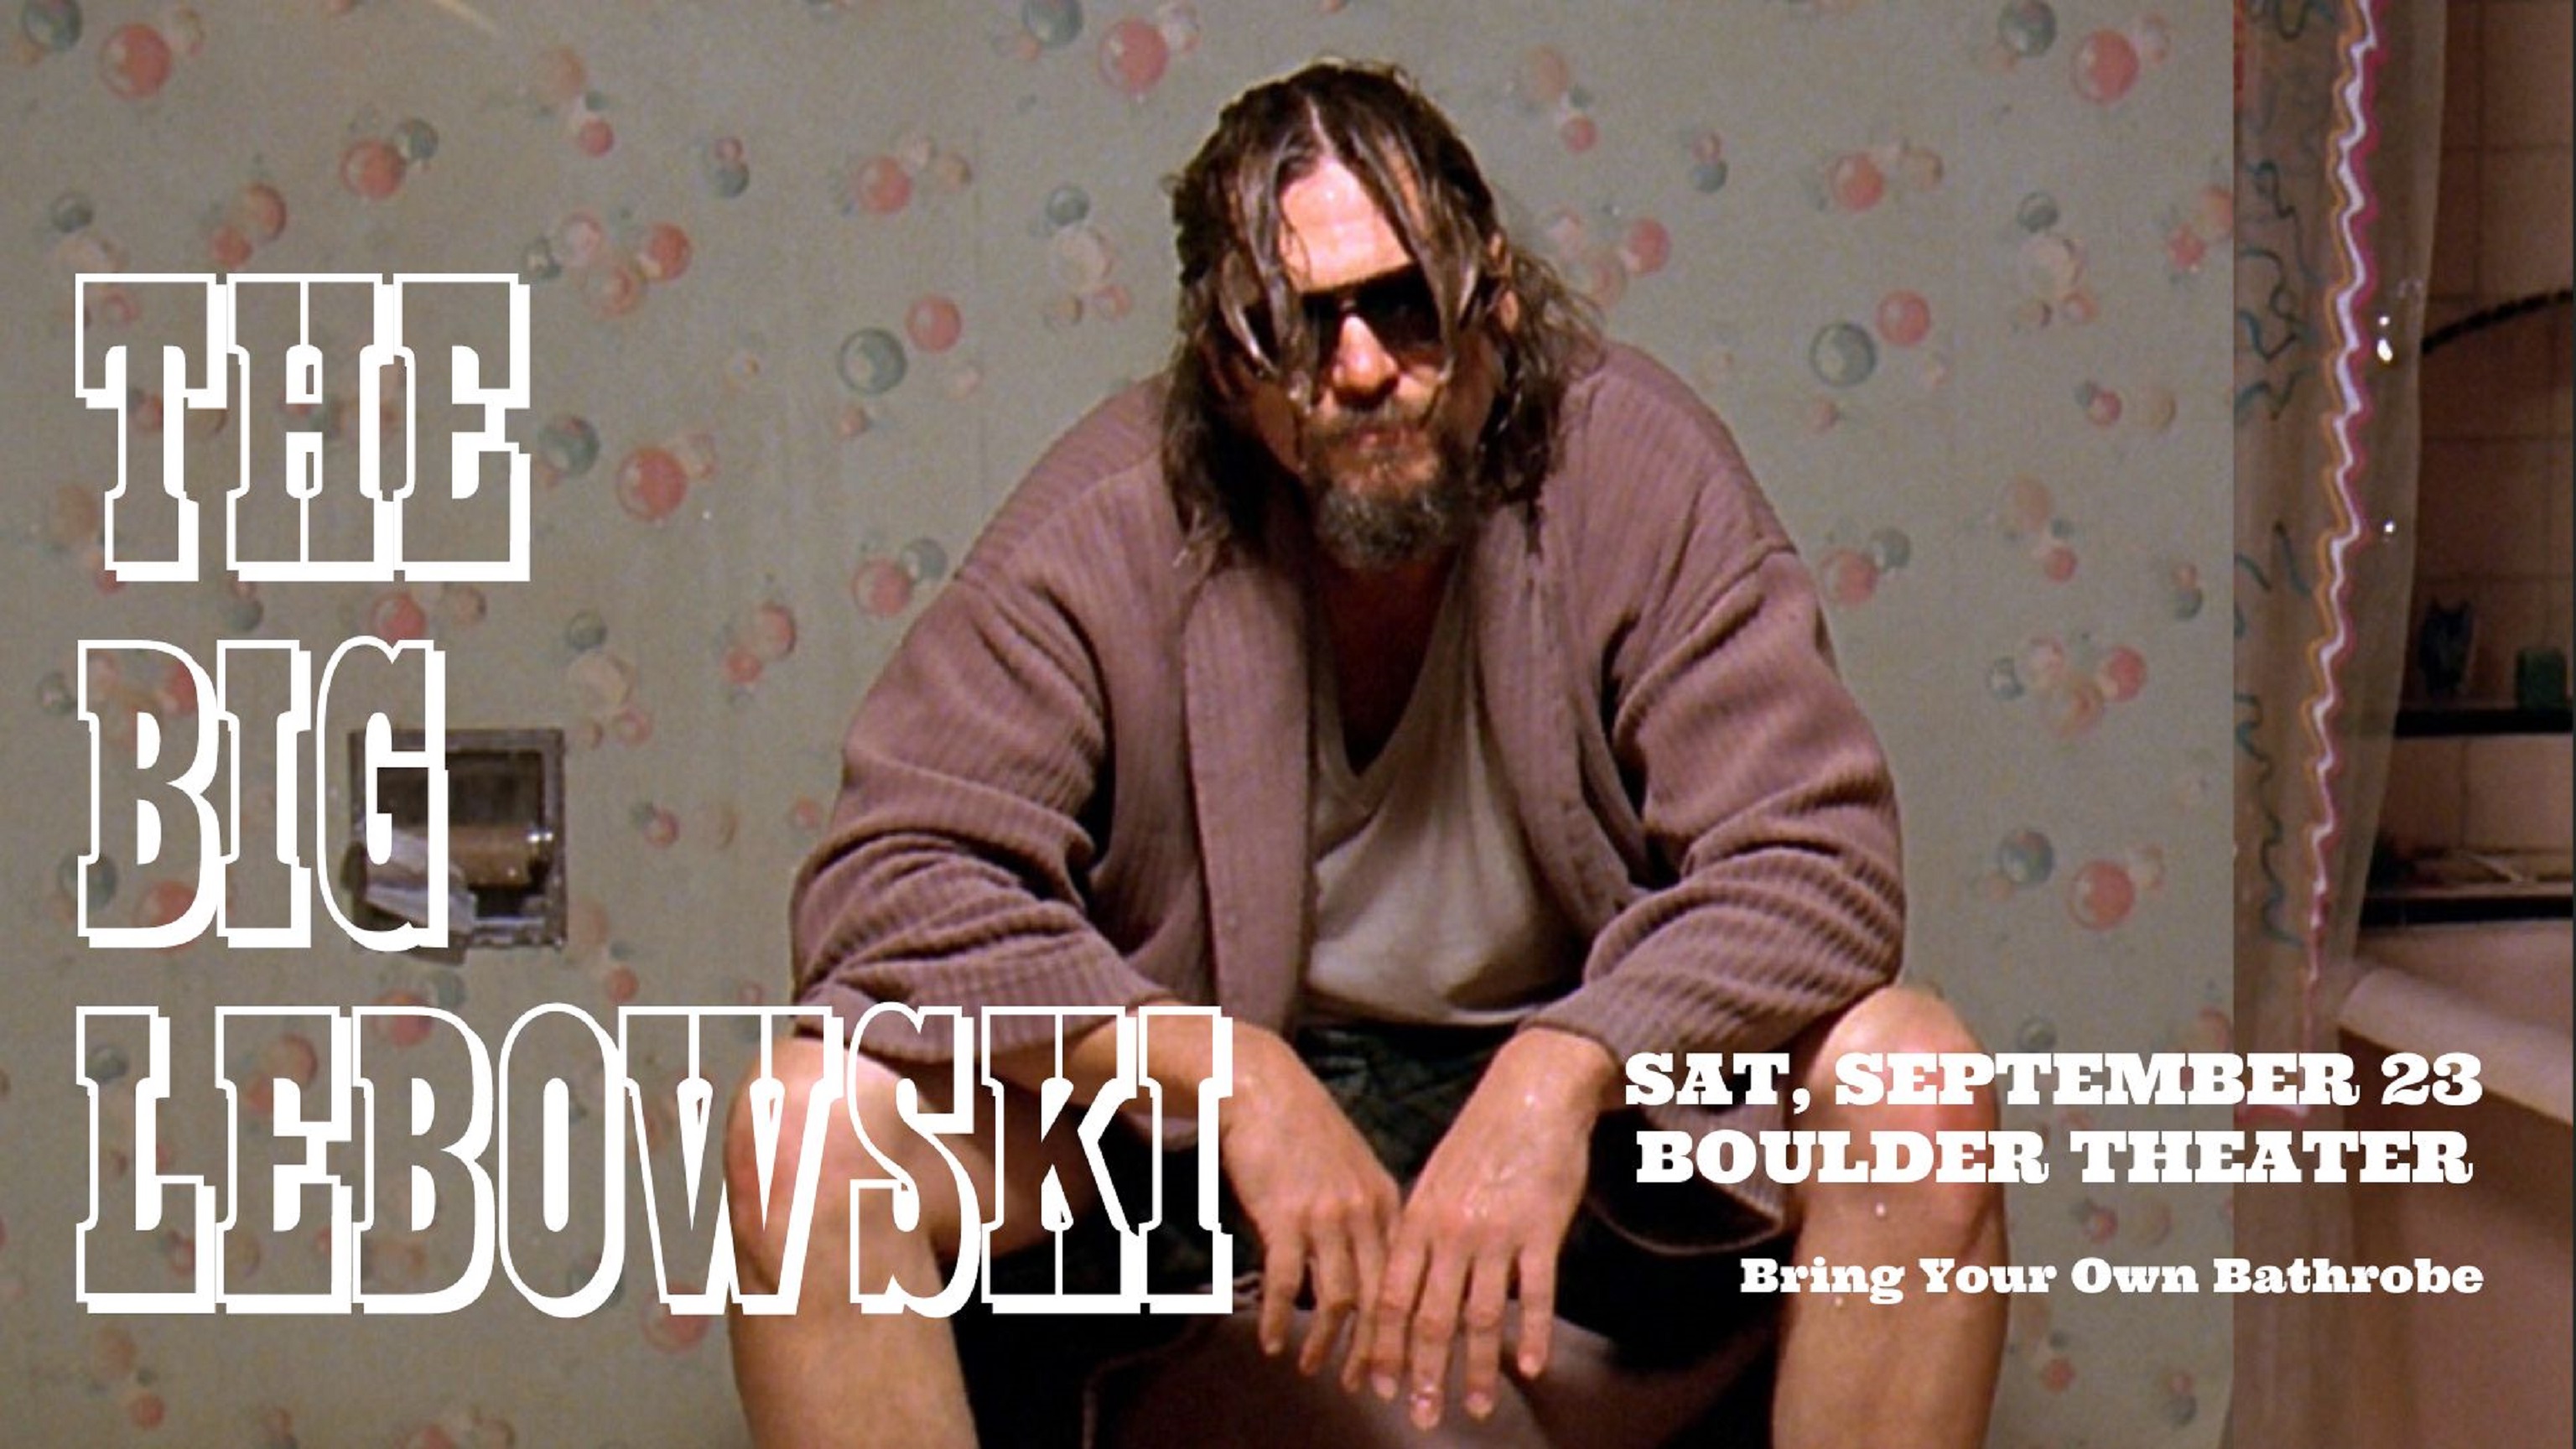 The Big Lebowski is coming back to the Boulder Theater